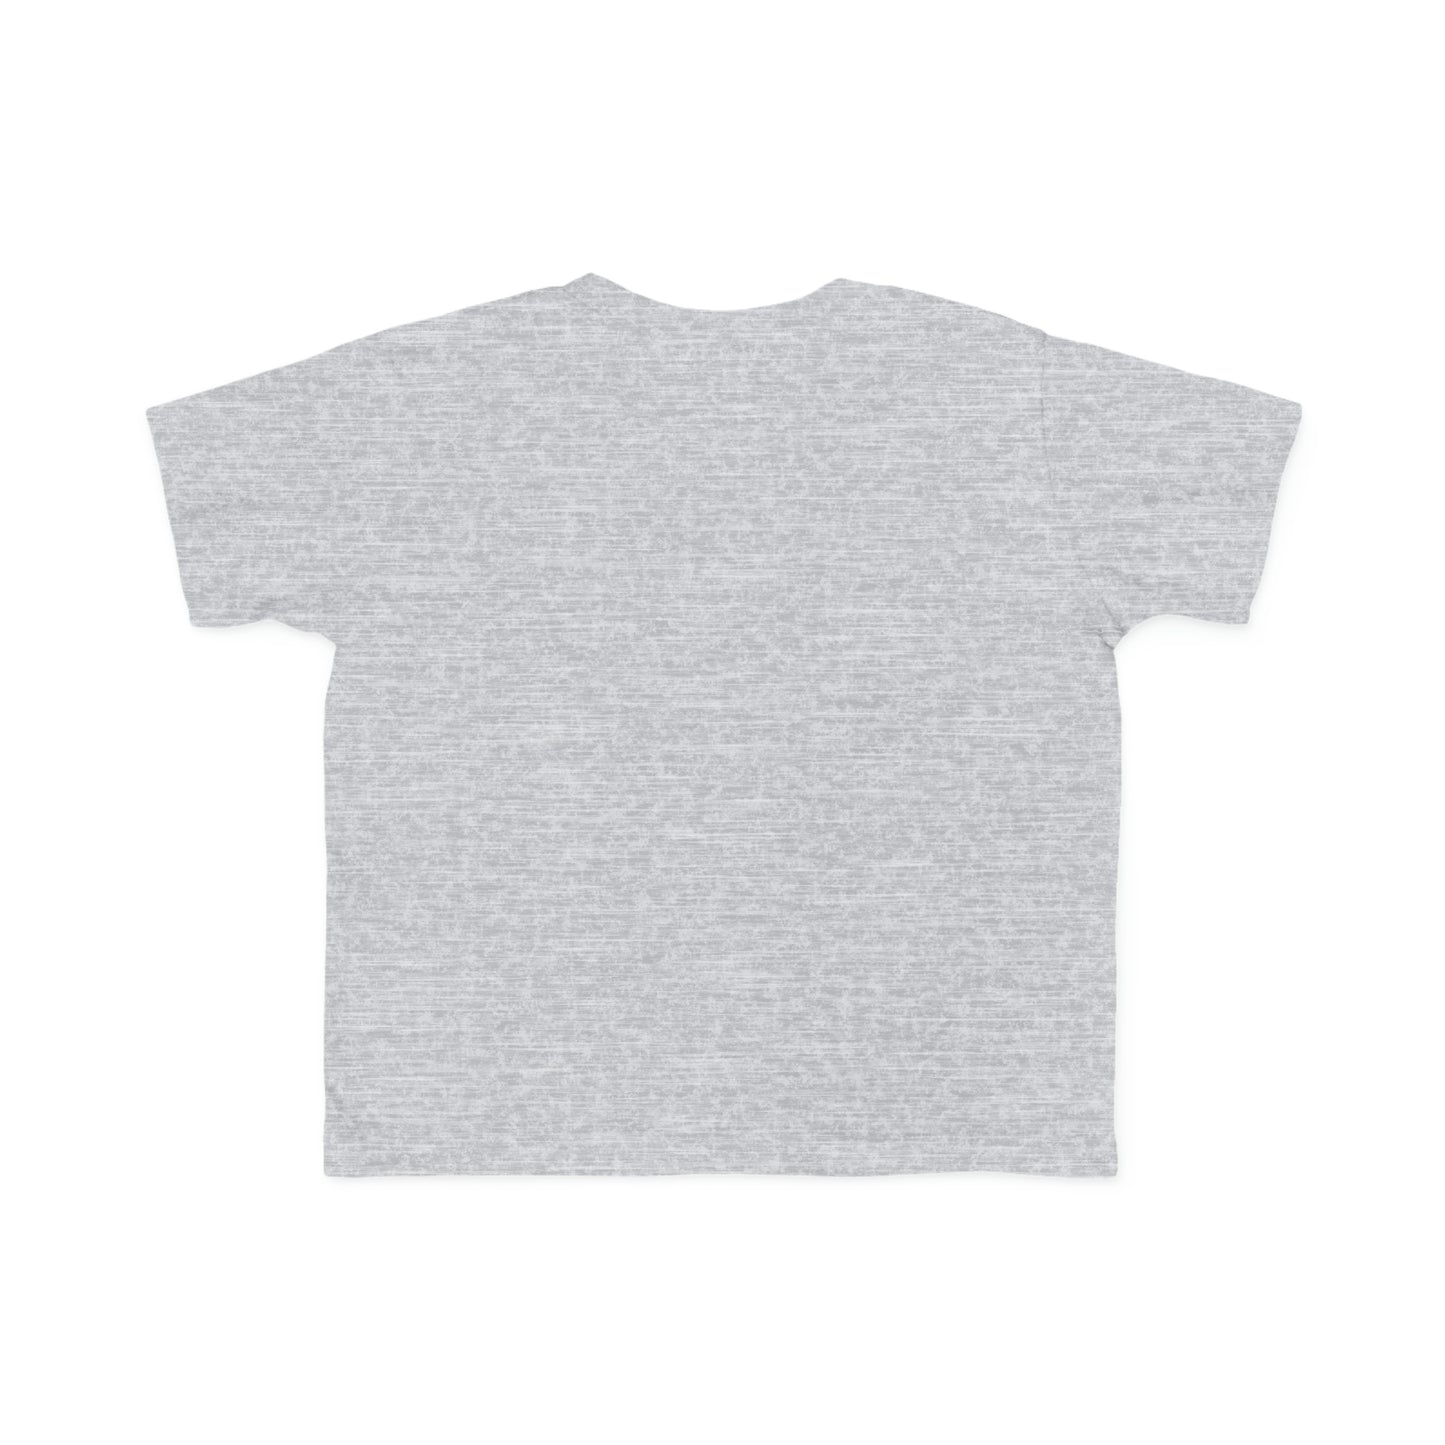 DinoRC Christmas Toddler's Fine Jersey Tee